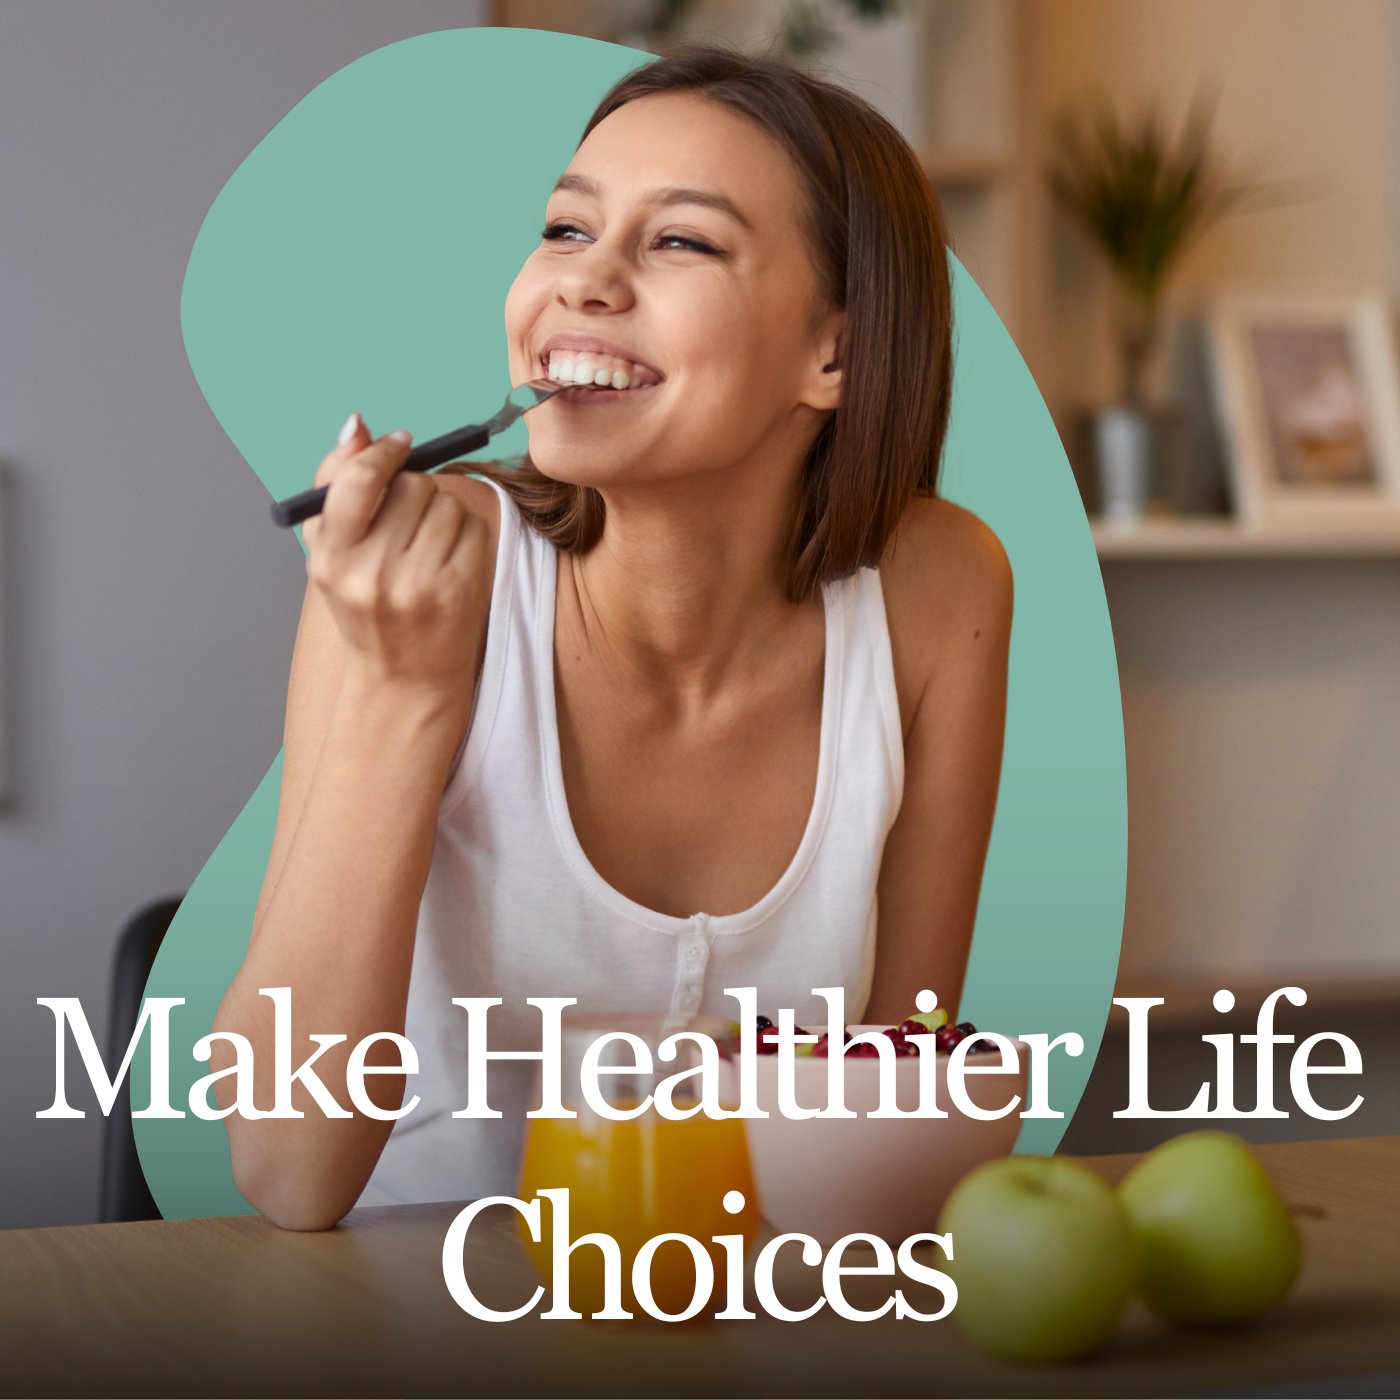 Make Healthier Life Choices Hypnotherapy - Clearmindshypnotherapy